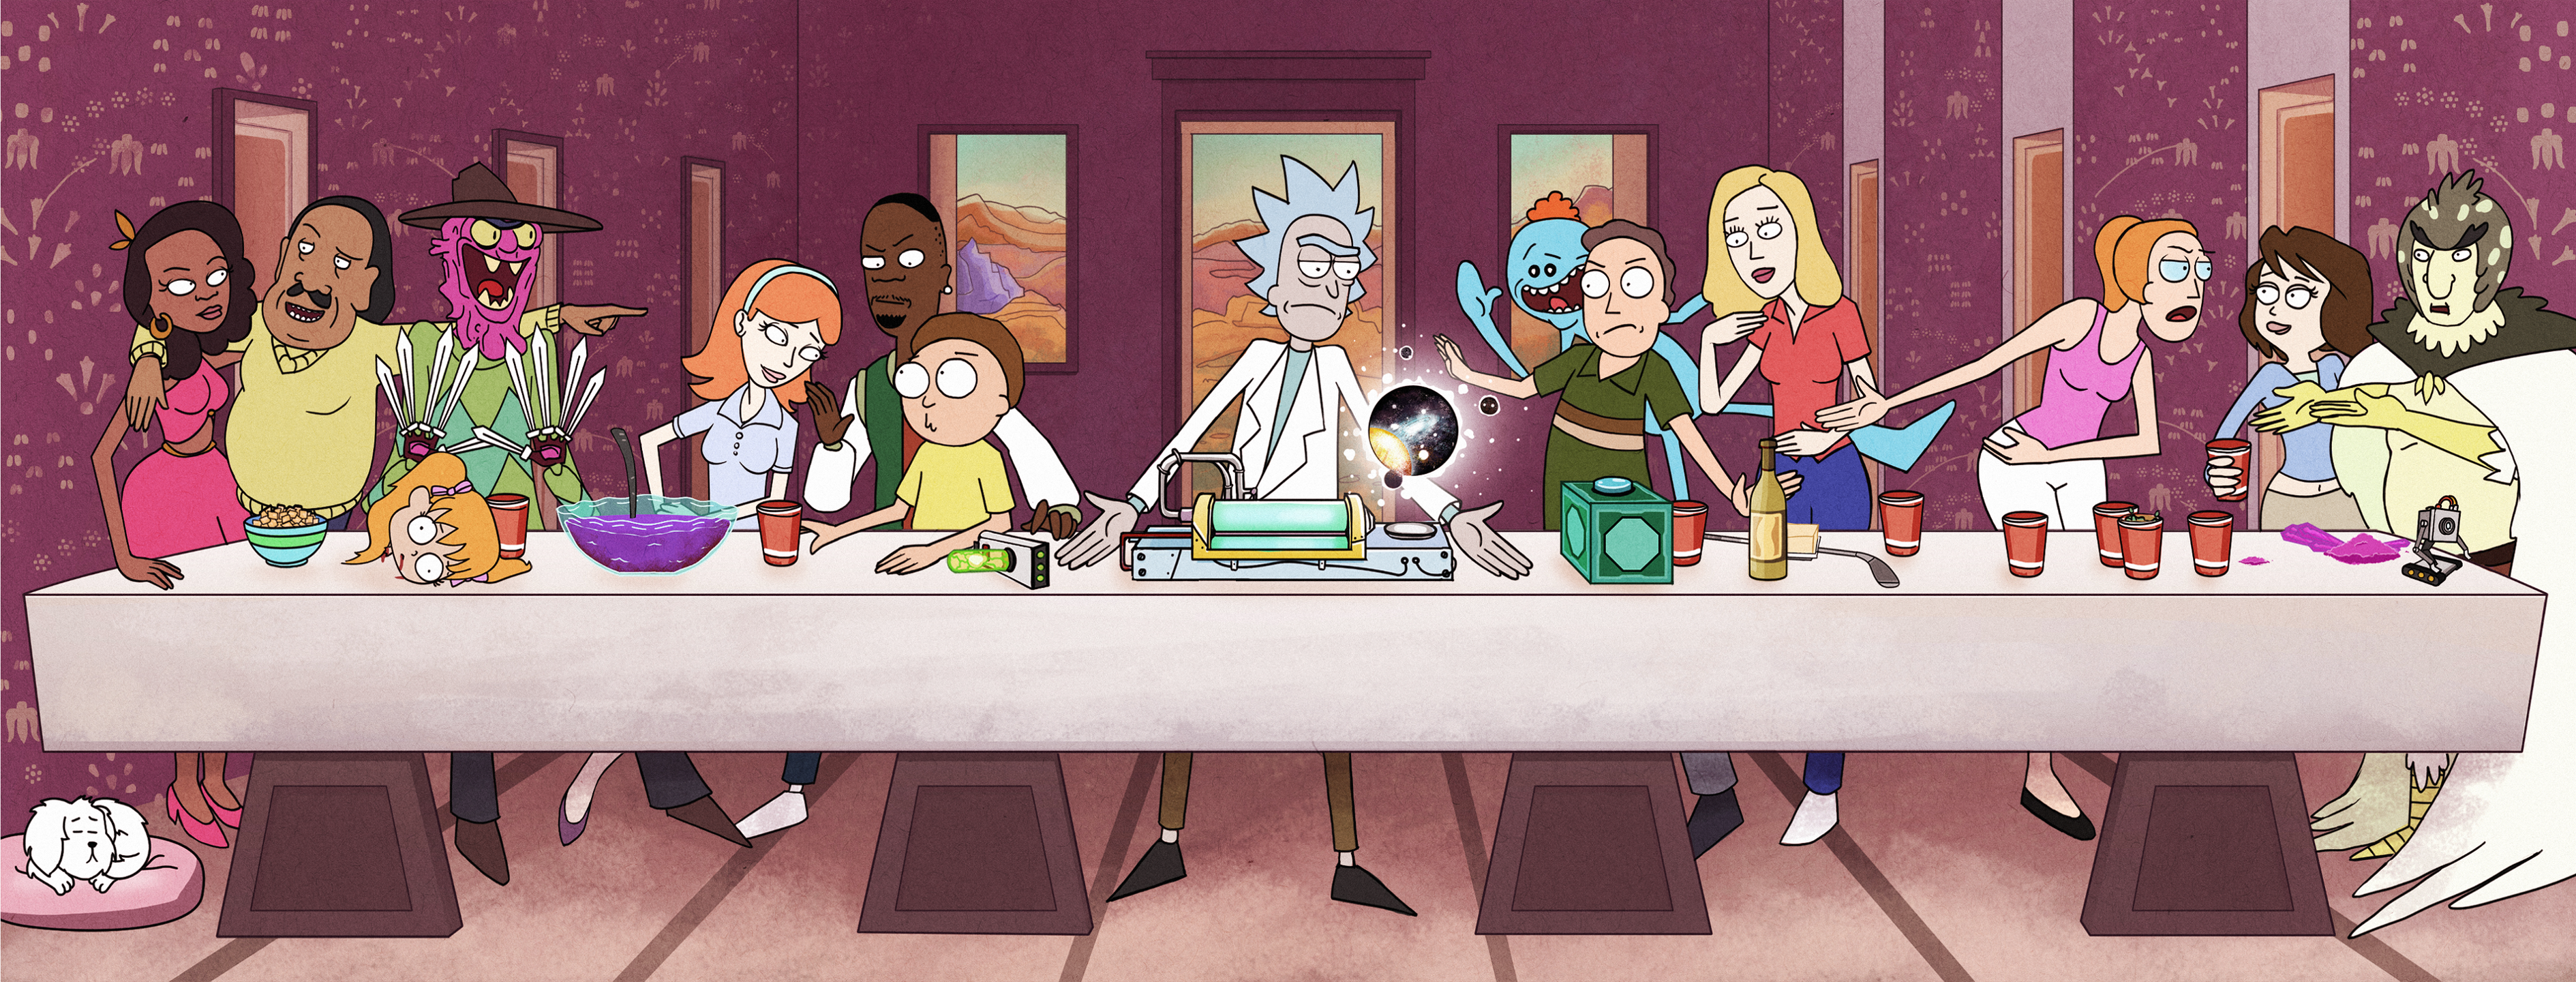 General 3779x1440 Rick and Morty Rick Sanchez Morty Smith Bird Person Beth Smith Jerry Smith Summer Smith Mr. Meeseeks The Last Supper cartoon TV series DeviantArt